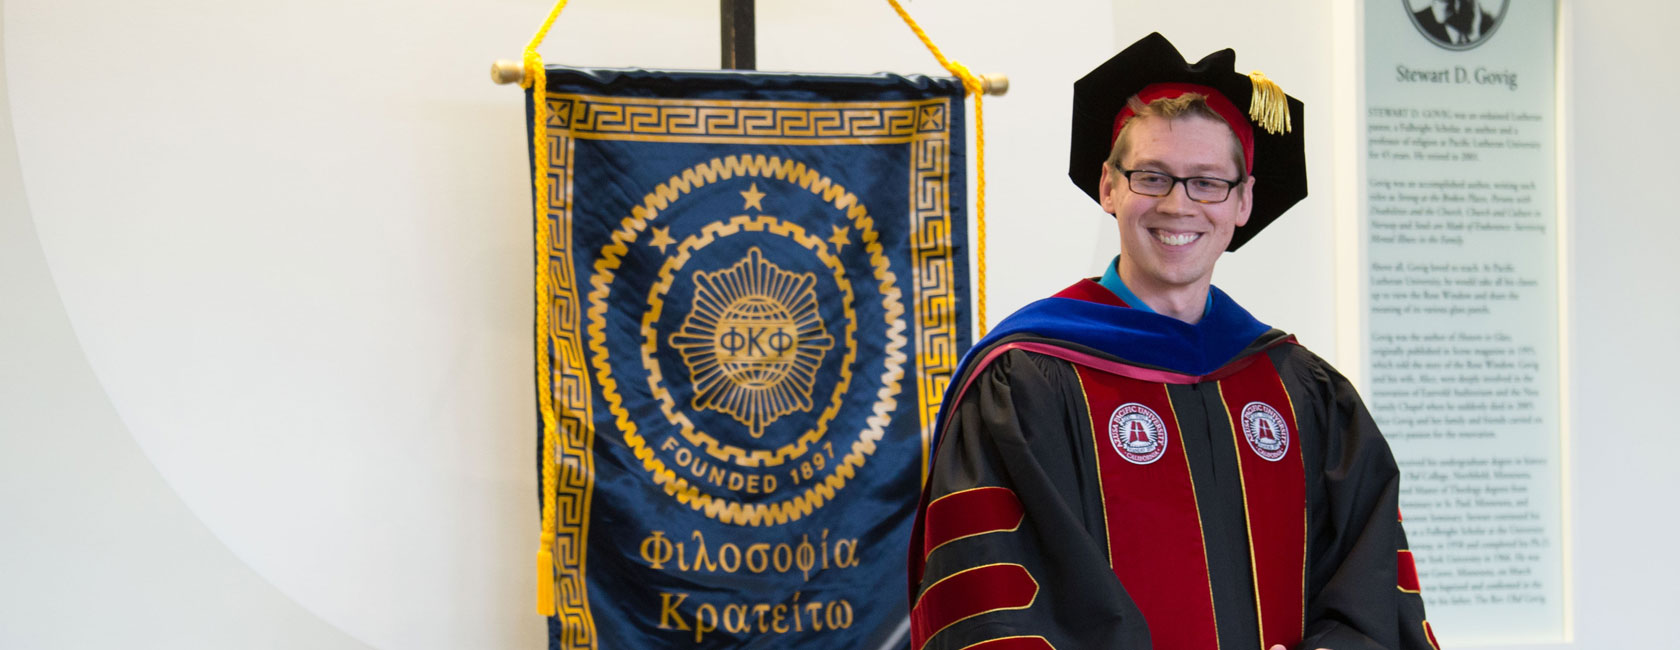 Phi Kappa Phi Chapter instillation ceremony at PLU on Friday, Feb. 19, 2016. (Photo: John Froschauer/PLU) Director of Academic Advising with the banner.